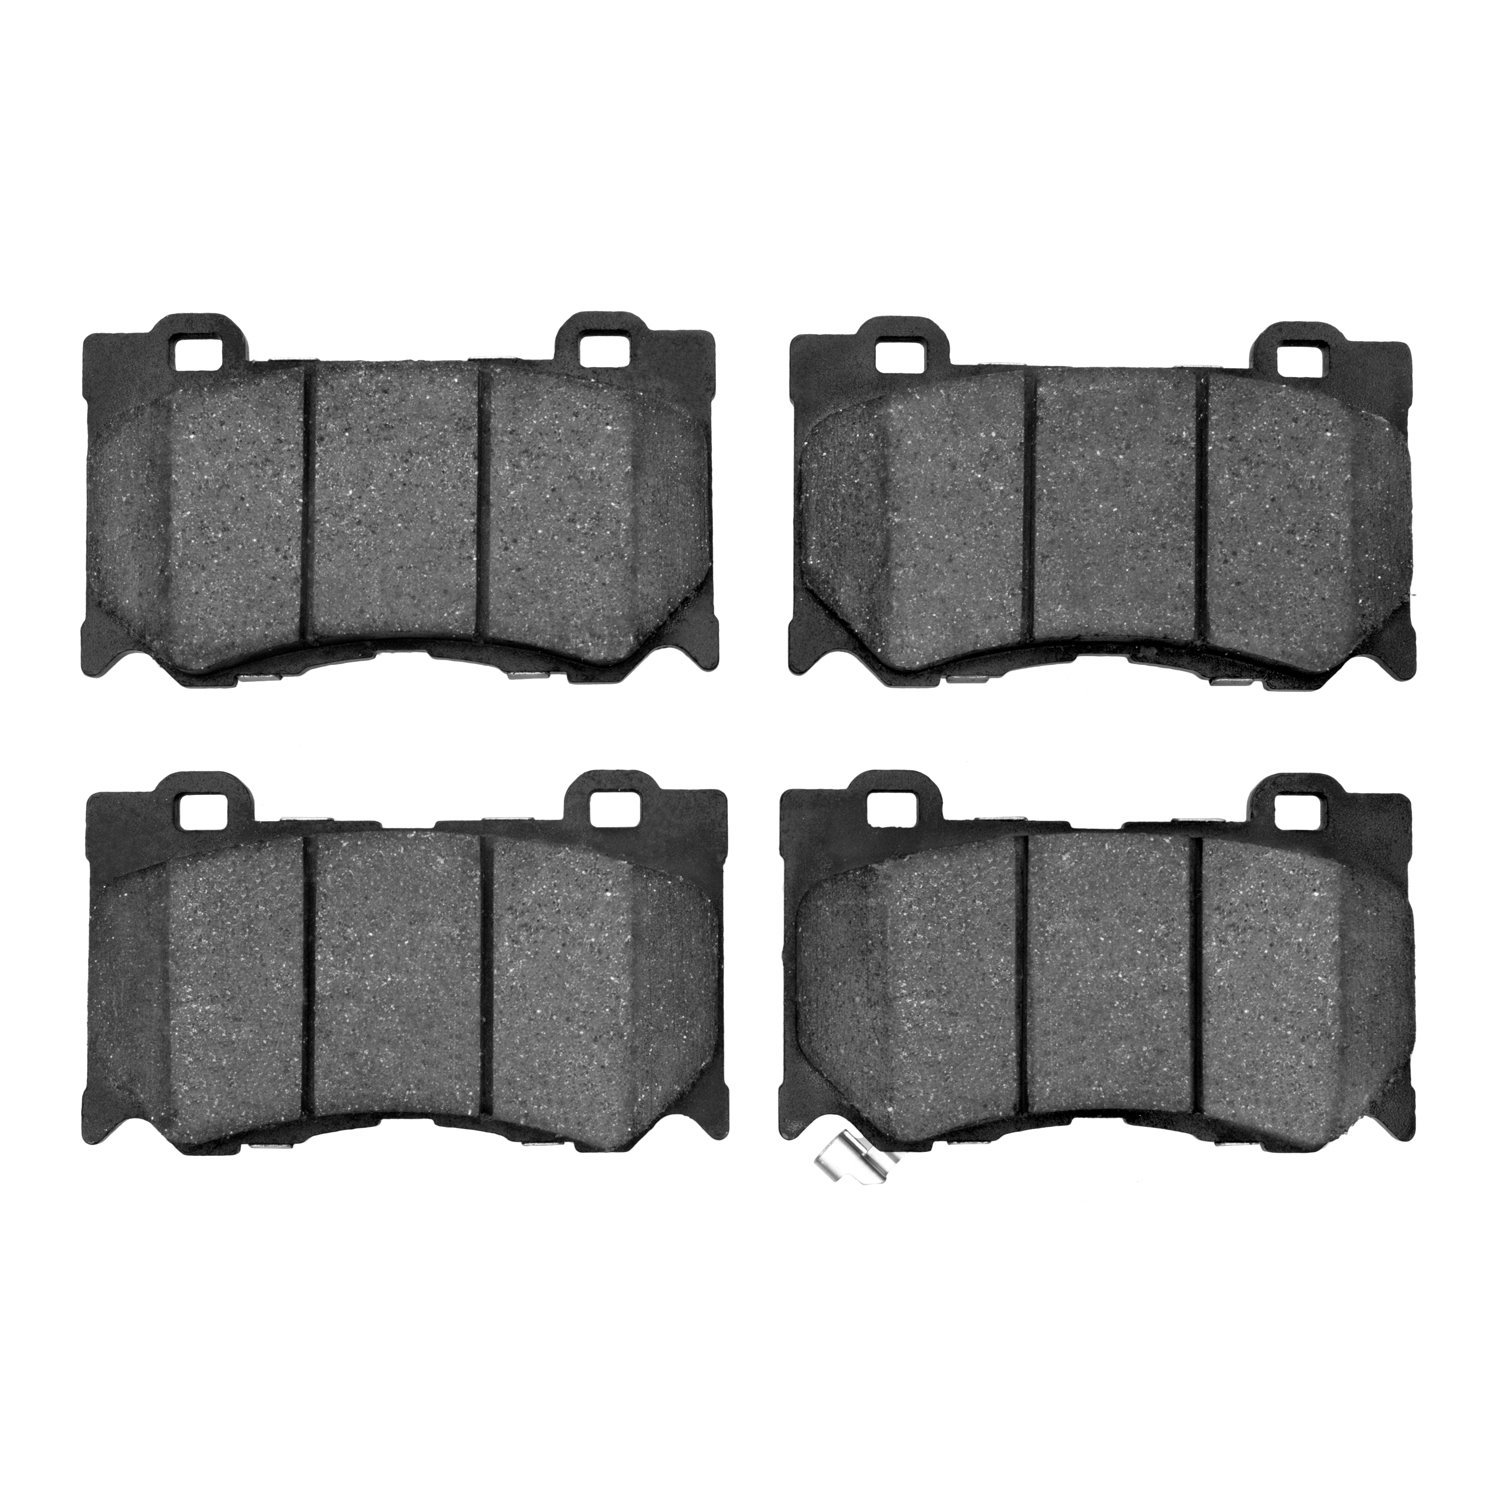 Ceramic Brake Pads, Fits Select Infiniti/Nissan, Position: Front